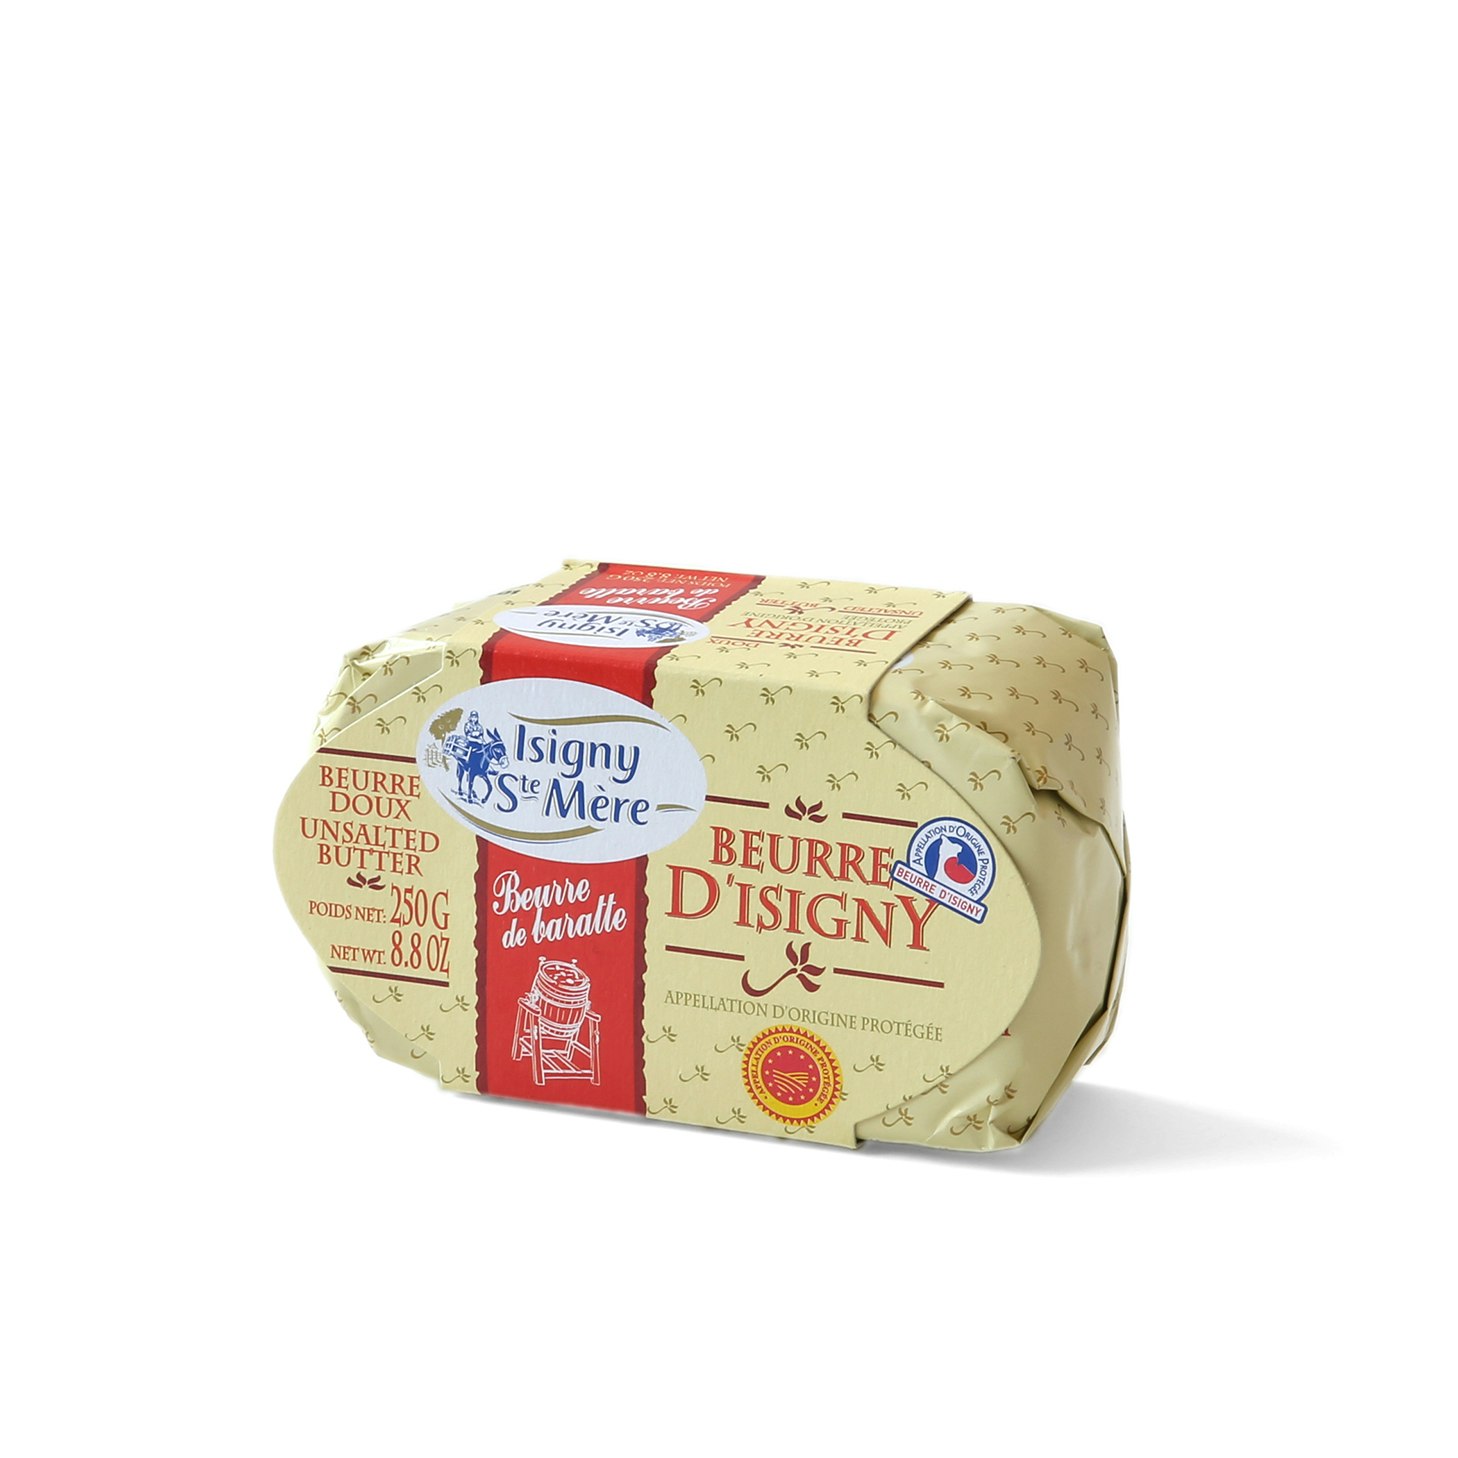 isigny ste mere unsalted butter specialty foods